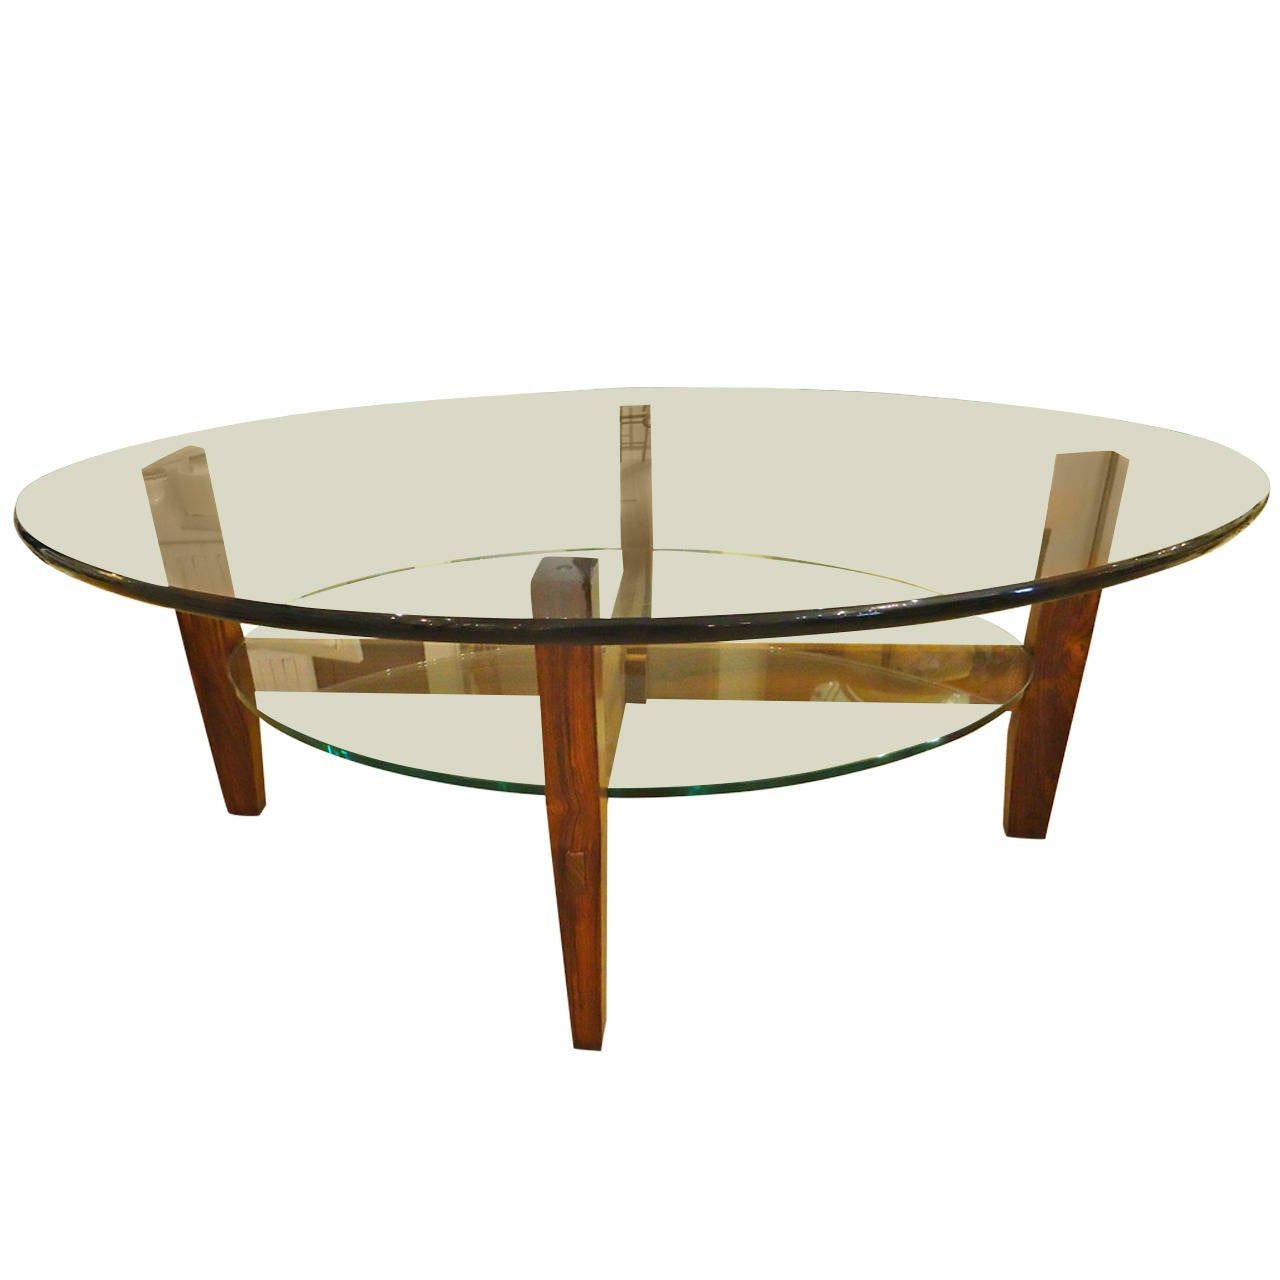 Two Tier Rosewood And Oval Glass Coffee Cocktail Table At For Most Recently Released Glass And Pewter Oval Coffee Tables (View 8 of 20)